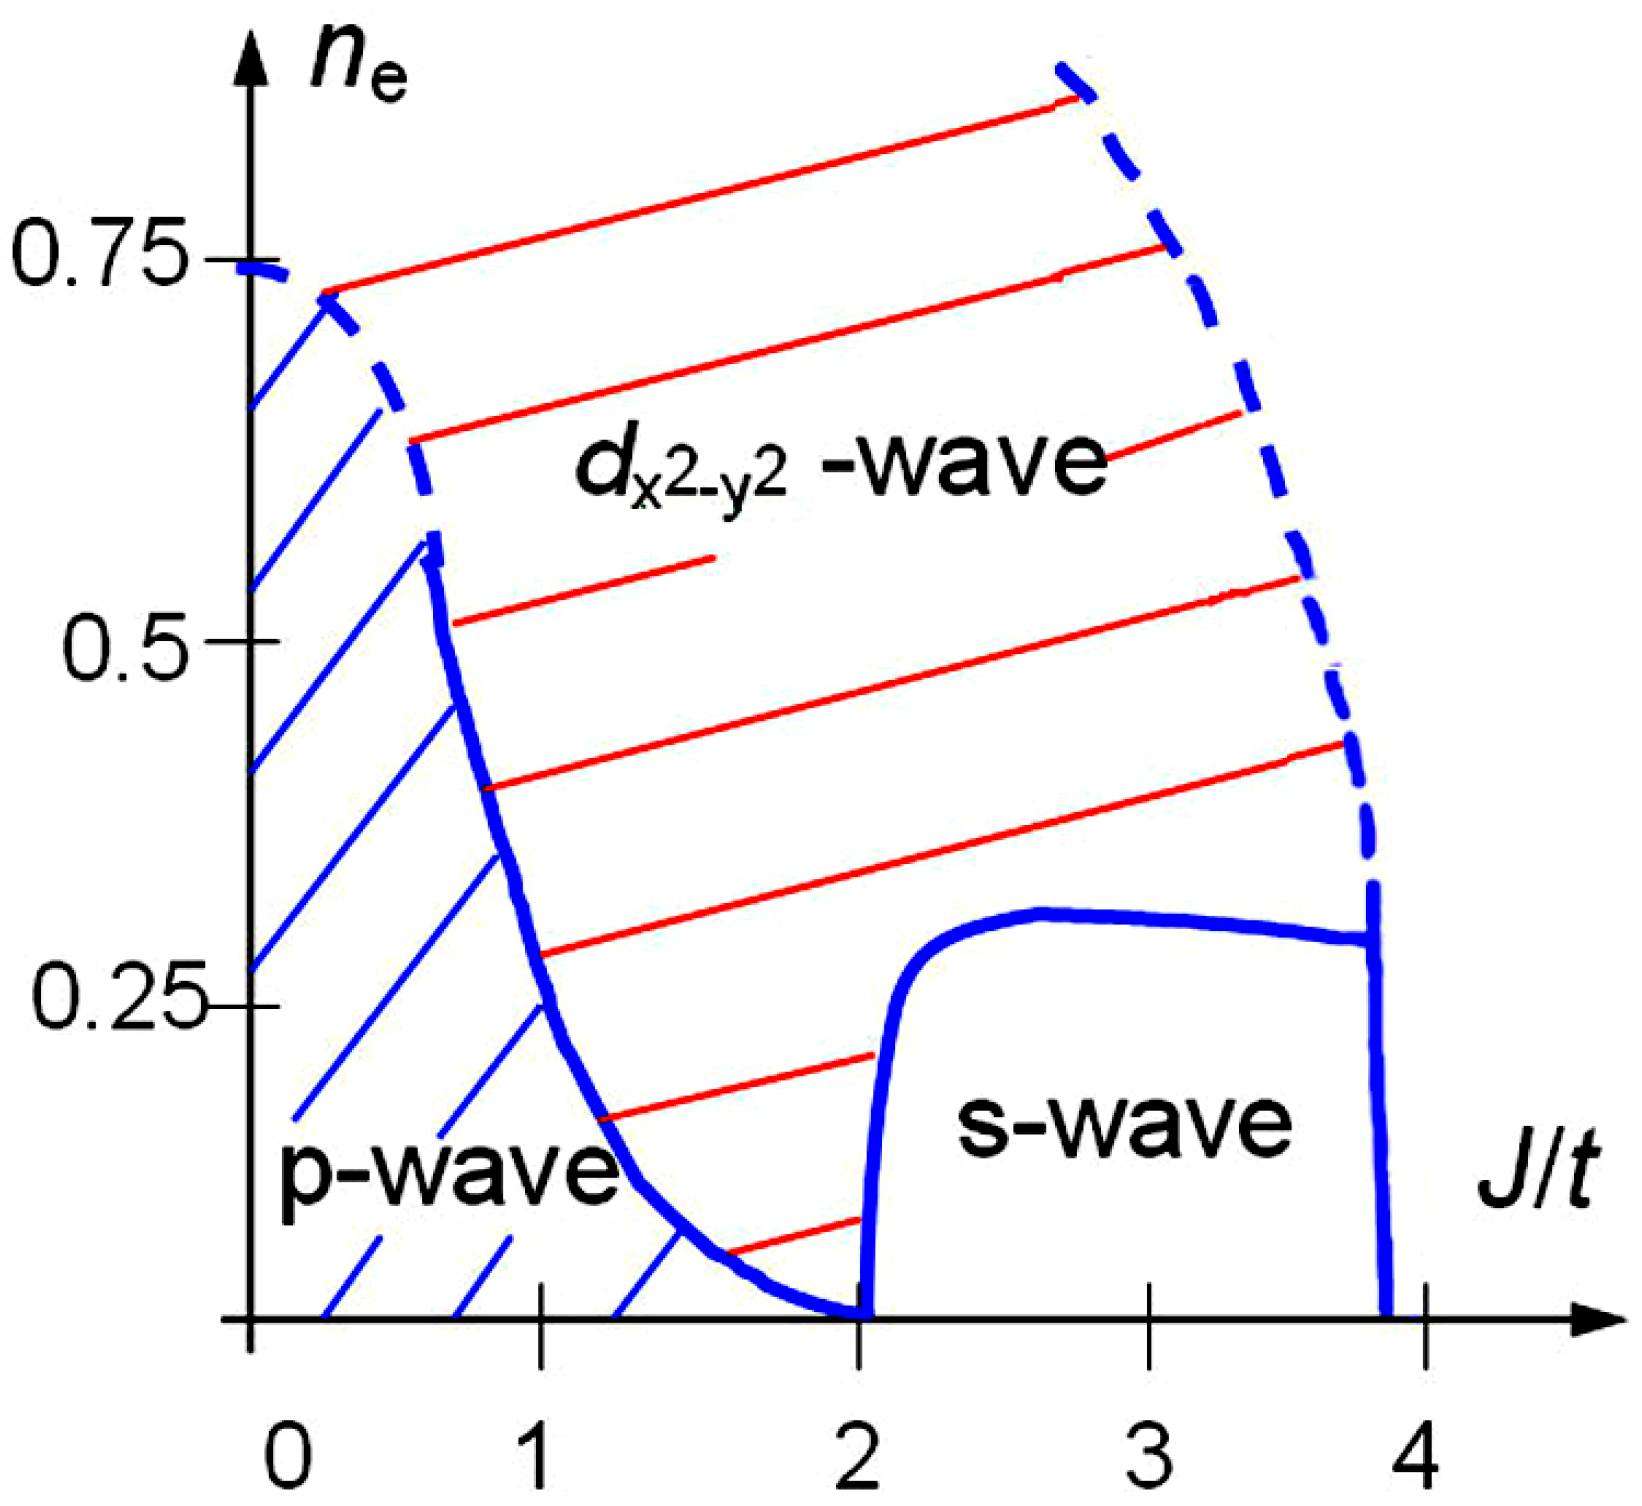 BCS thermal vacuum of fermionic superfluids and its perturbation theory